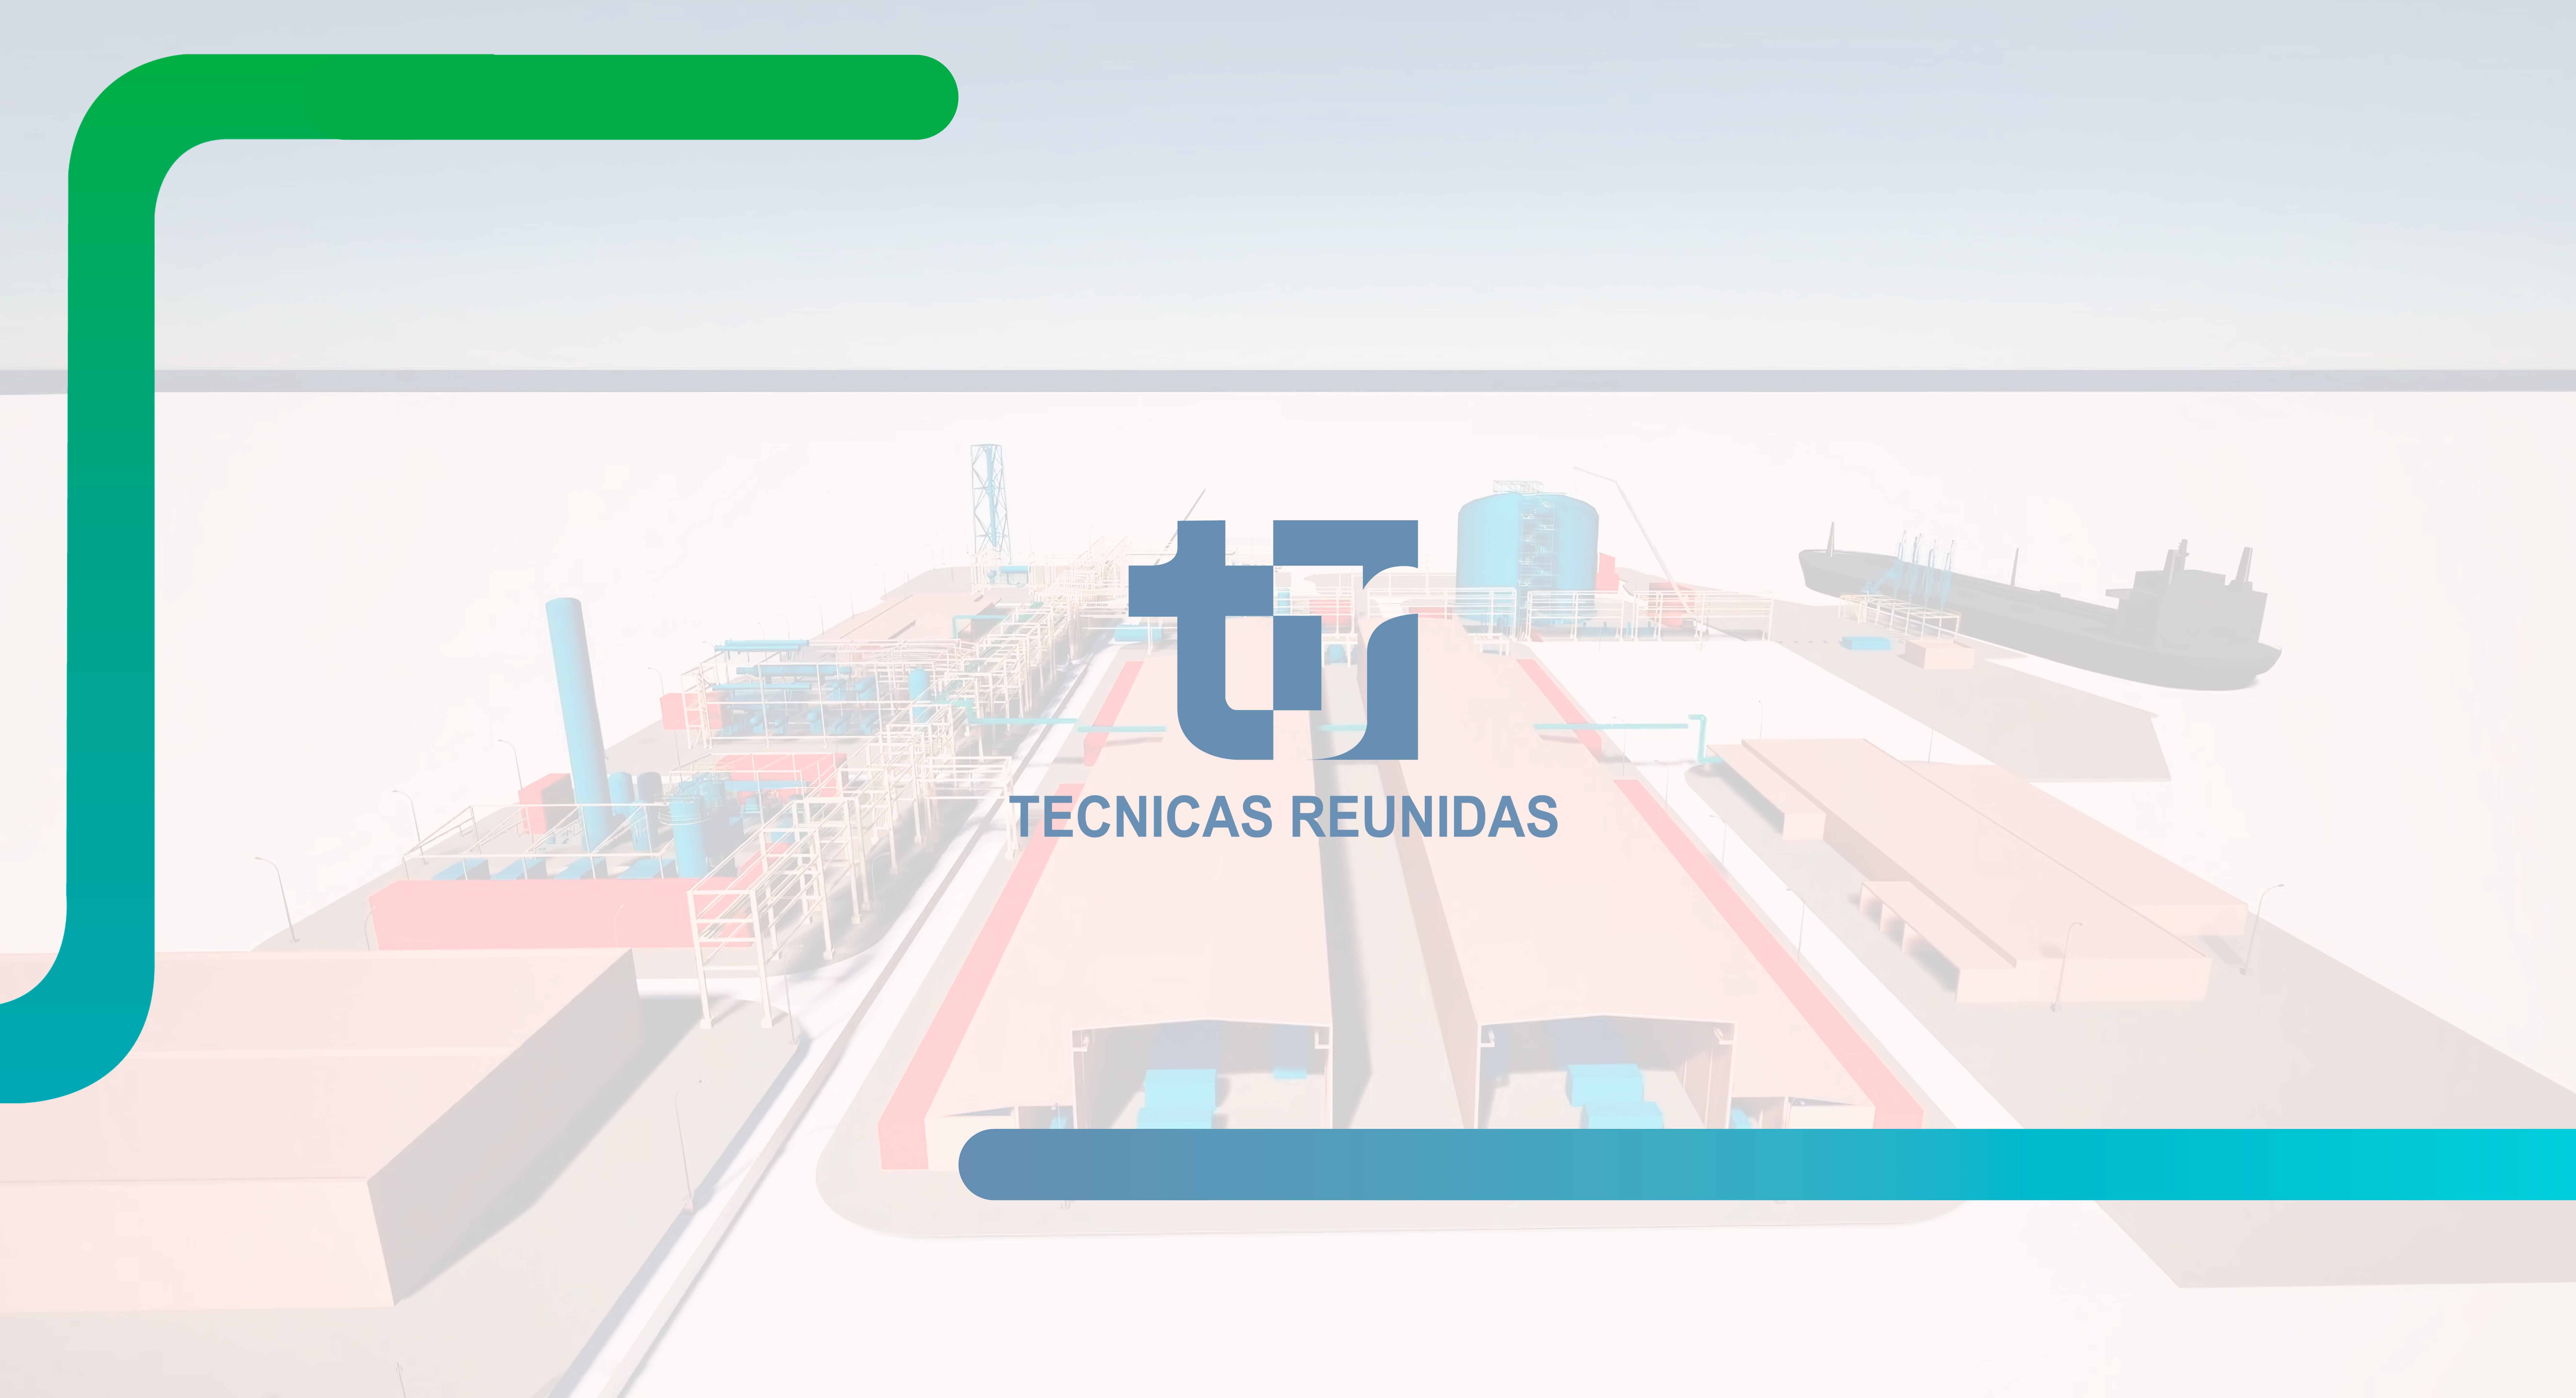 Técnicas Reunidas signs an agreement with IGNIS to provide engineering services for the development of green ammonia projects in Spain